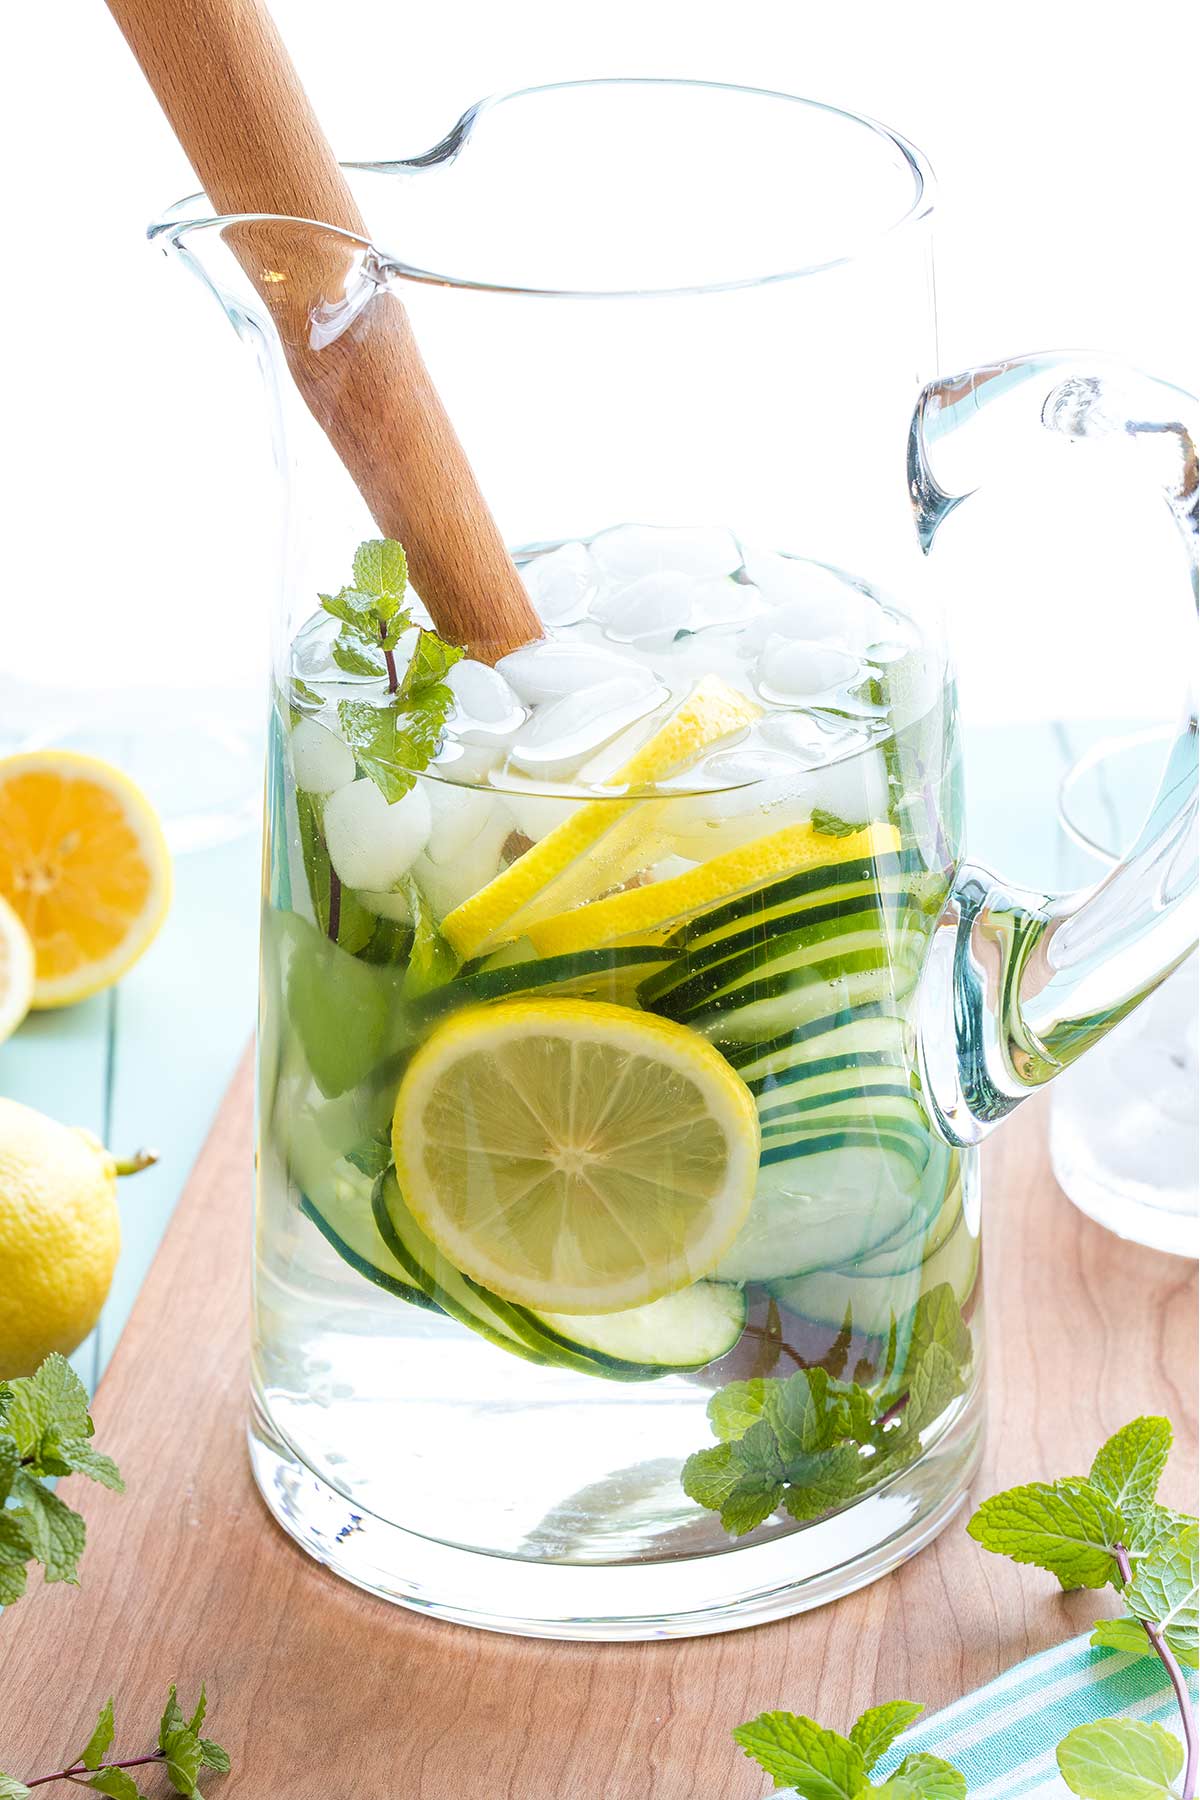 Side view of glass pitcher of water, so you can see the floating mint sprigs and slices of lemon and cucumbers.